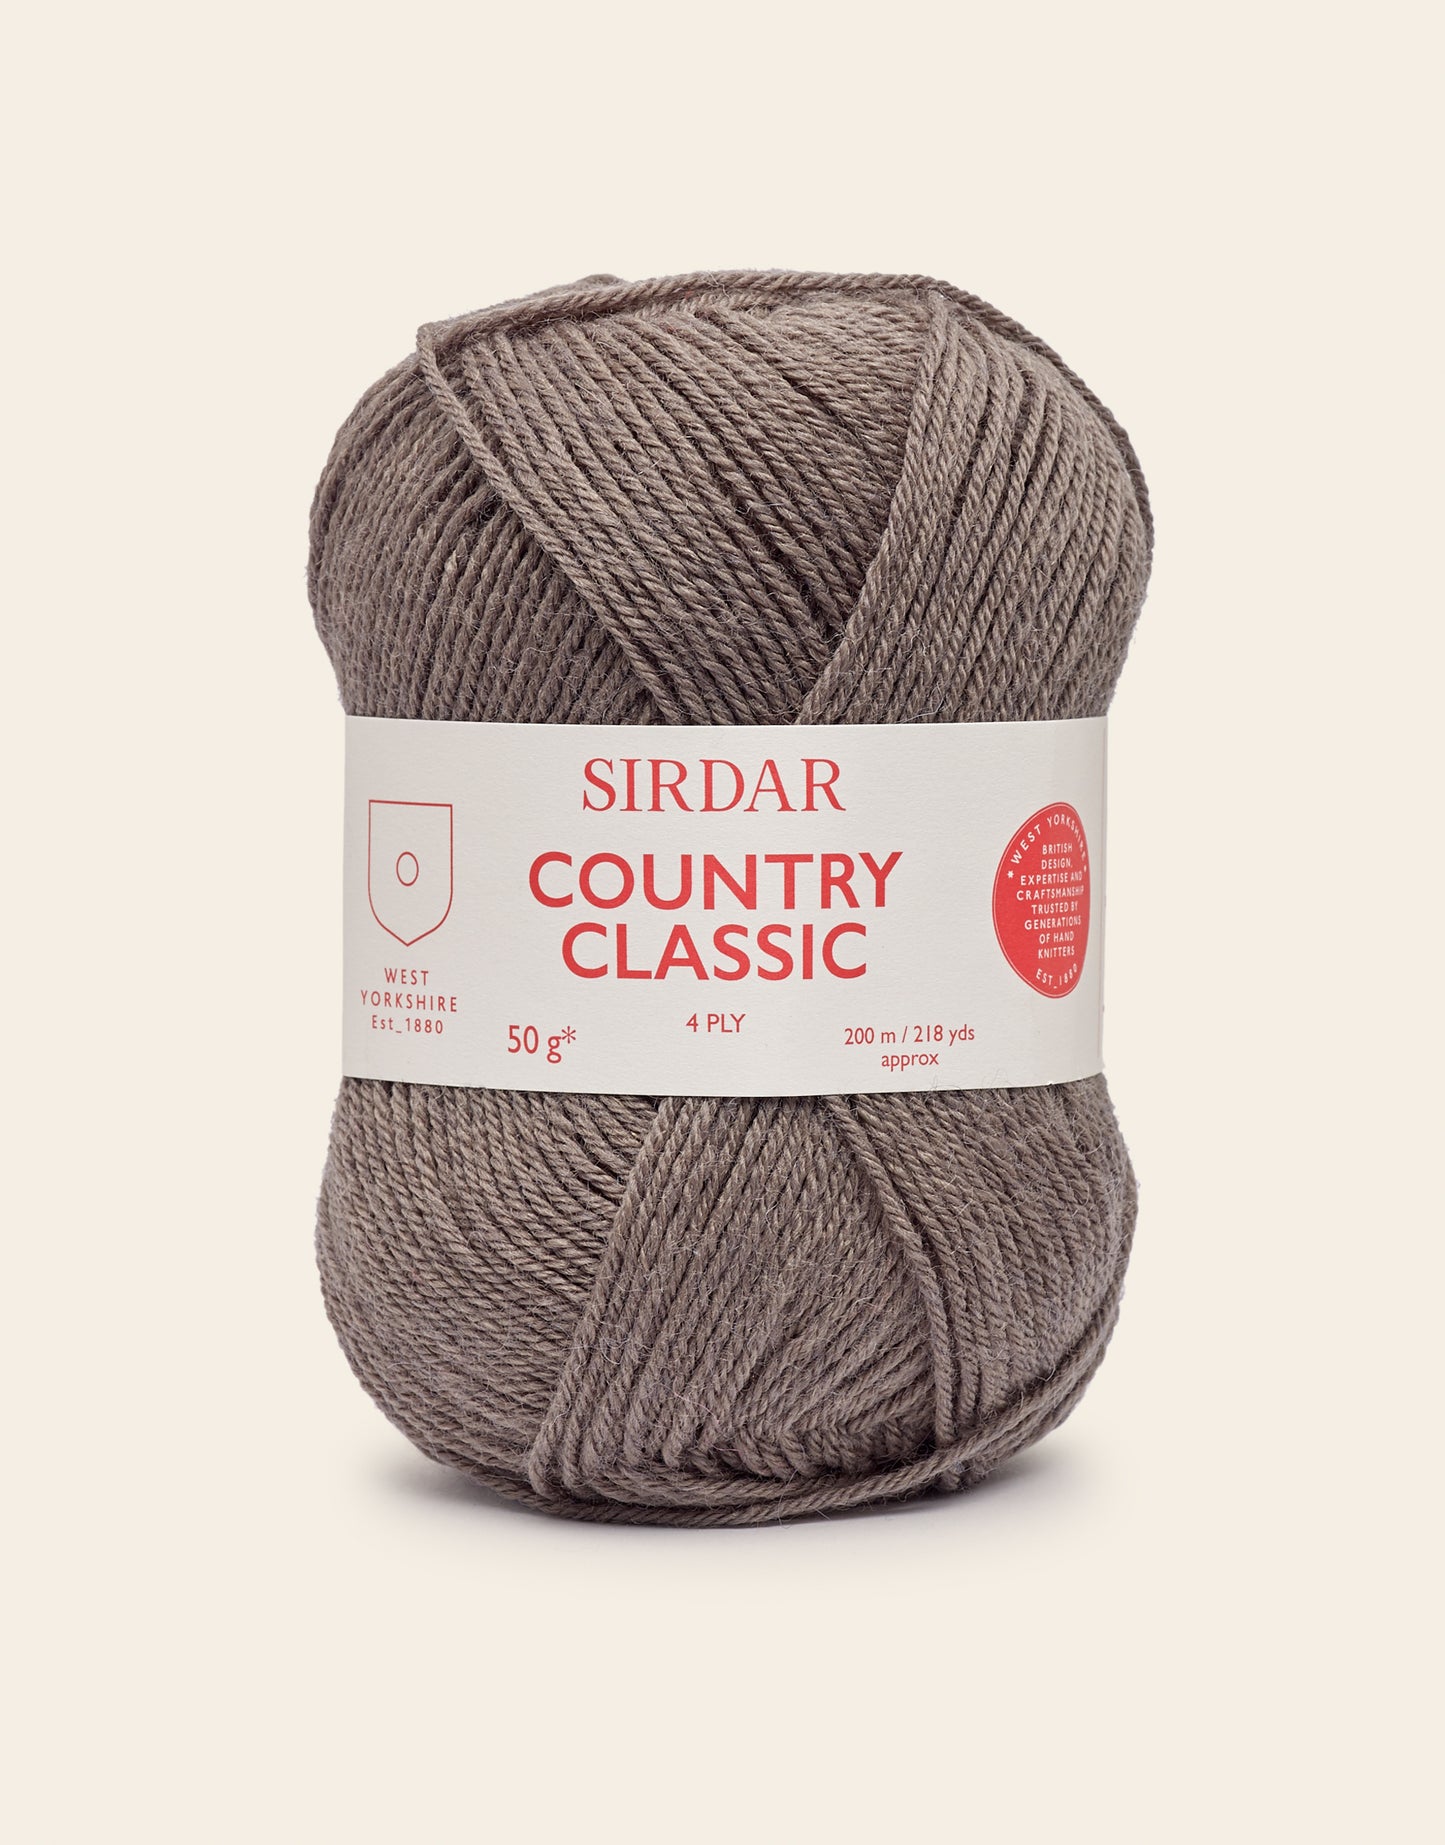 Sirdar Country Classic 4ply 50g